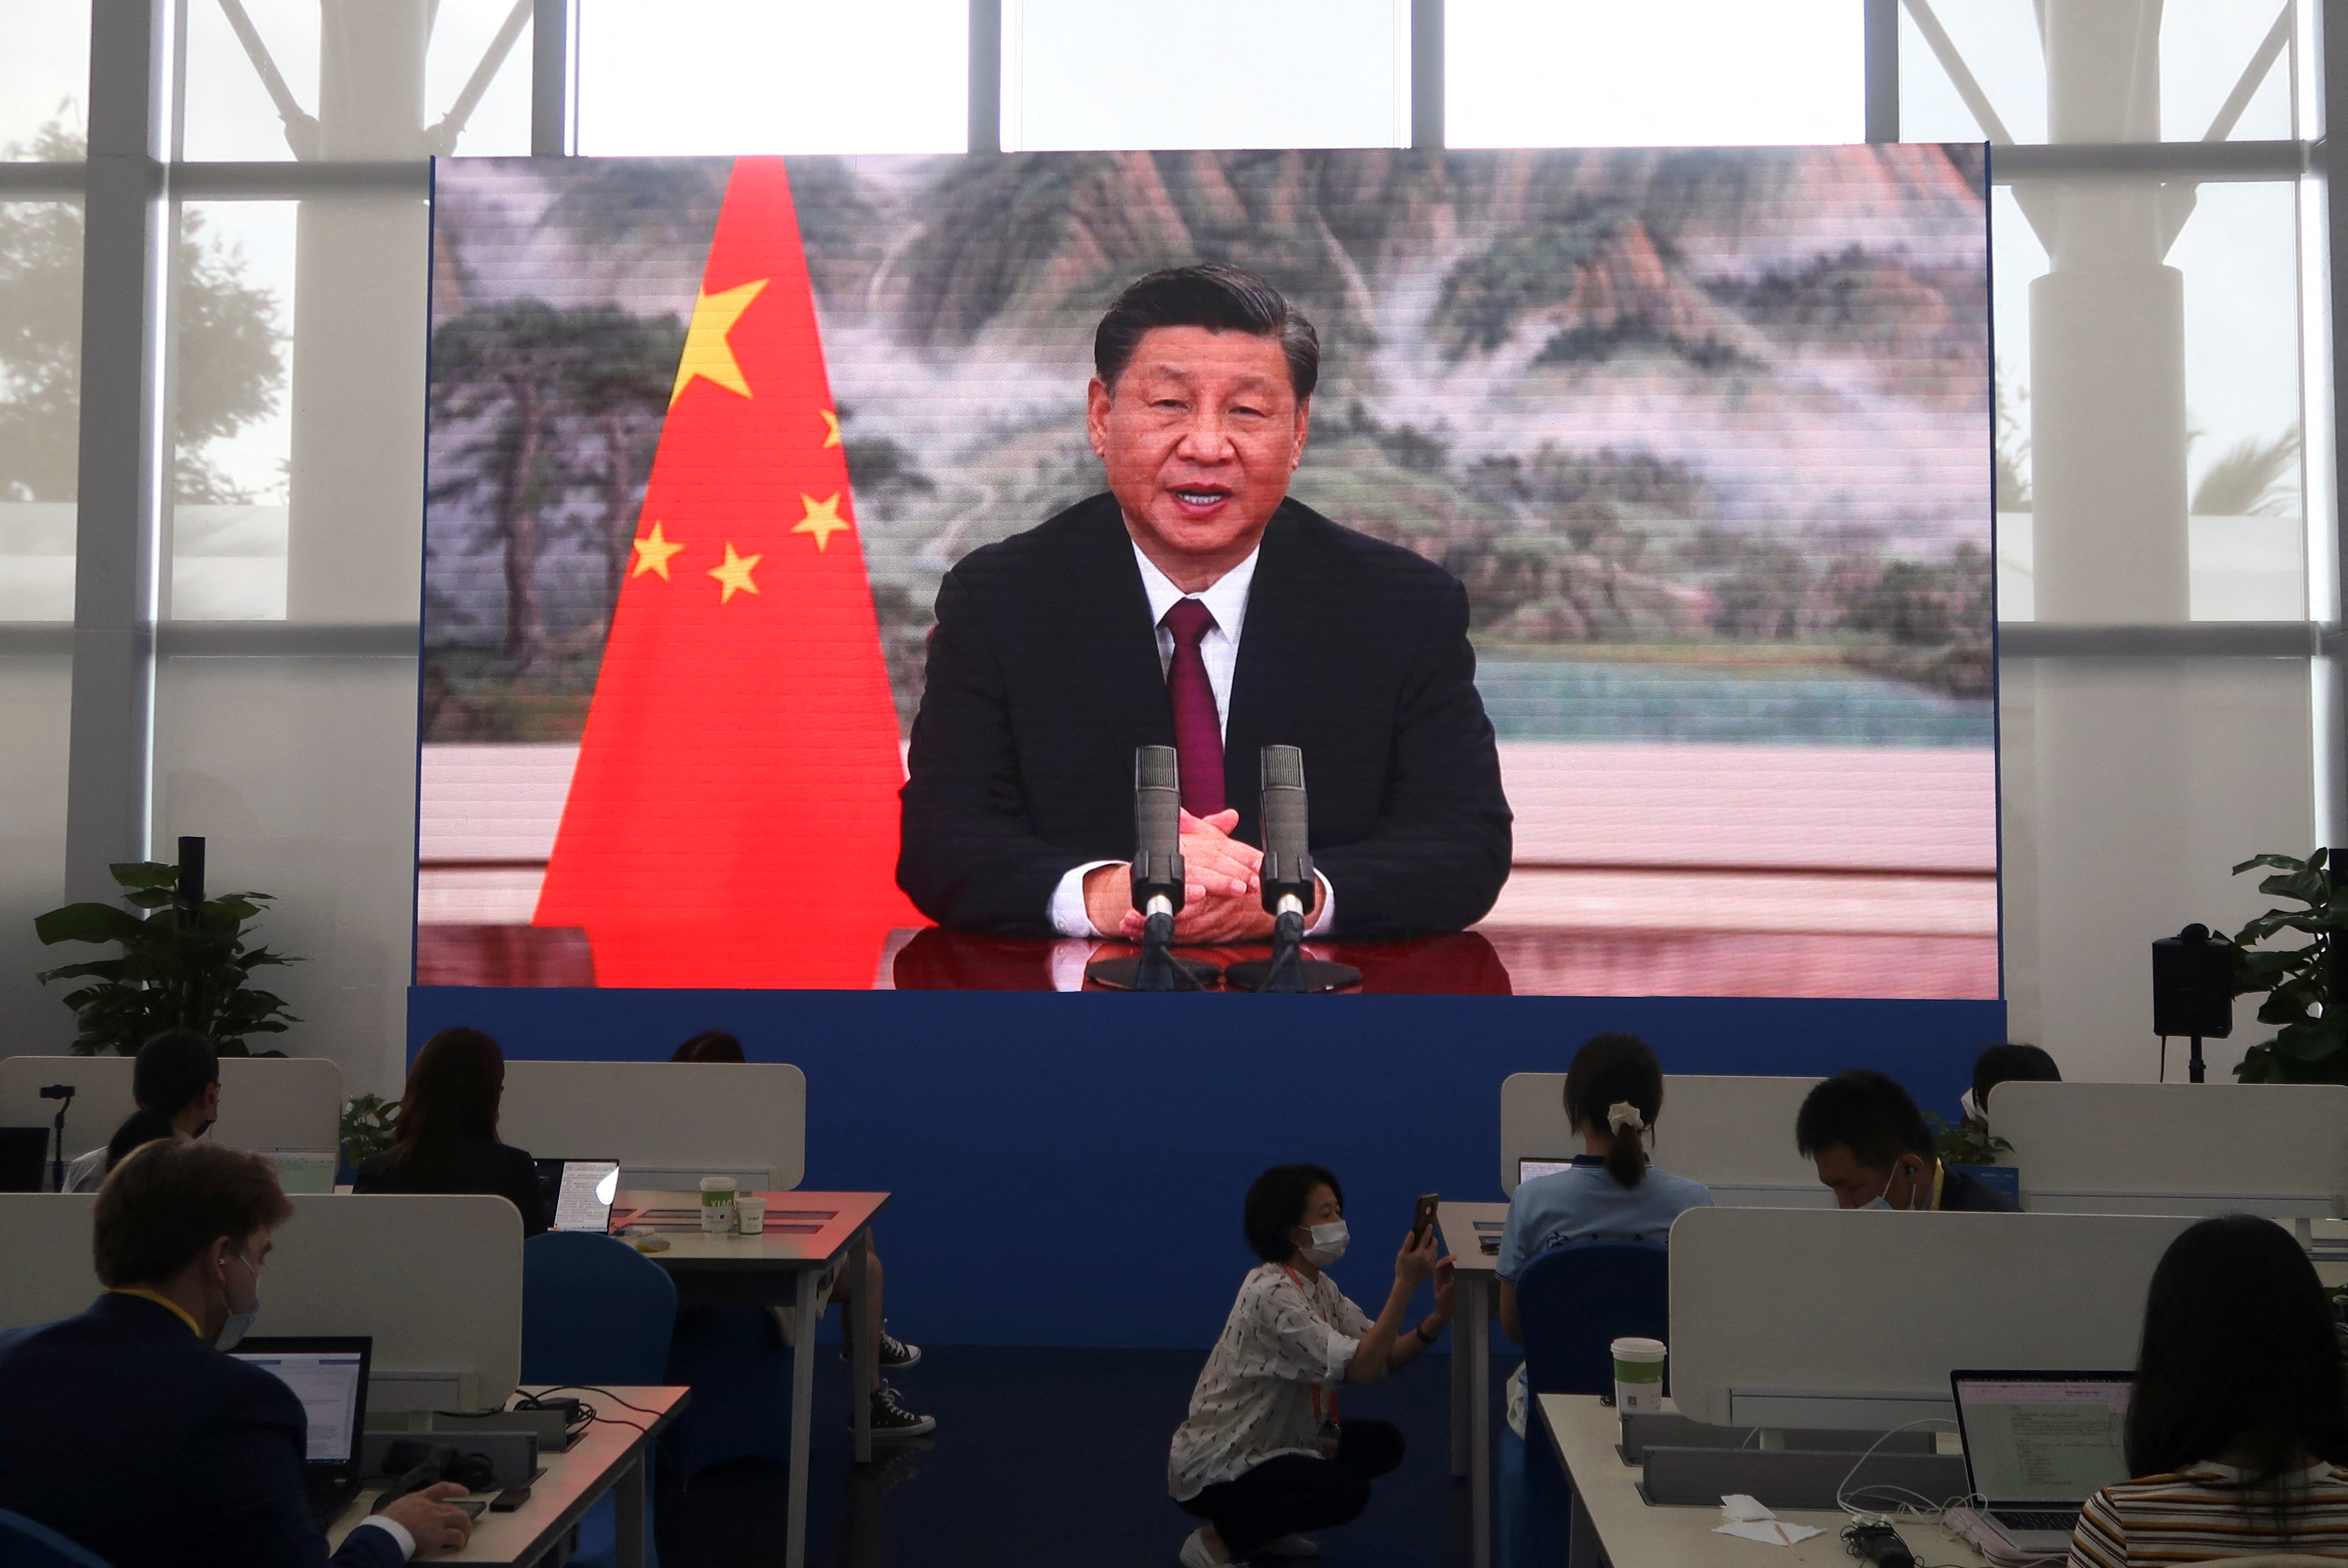 Chinese President Xi Jinping delivers a keynote address at the opening ceremony of the Boao Forum for Asia via video link in Boao.